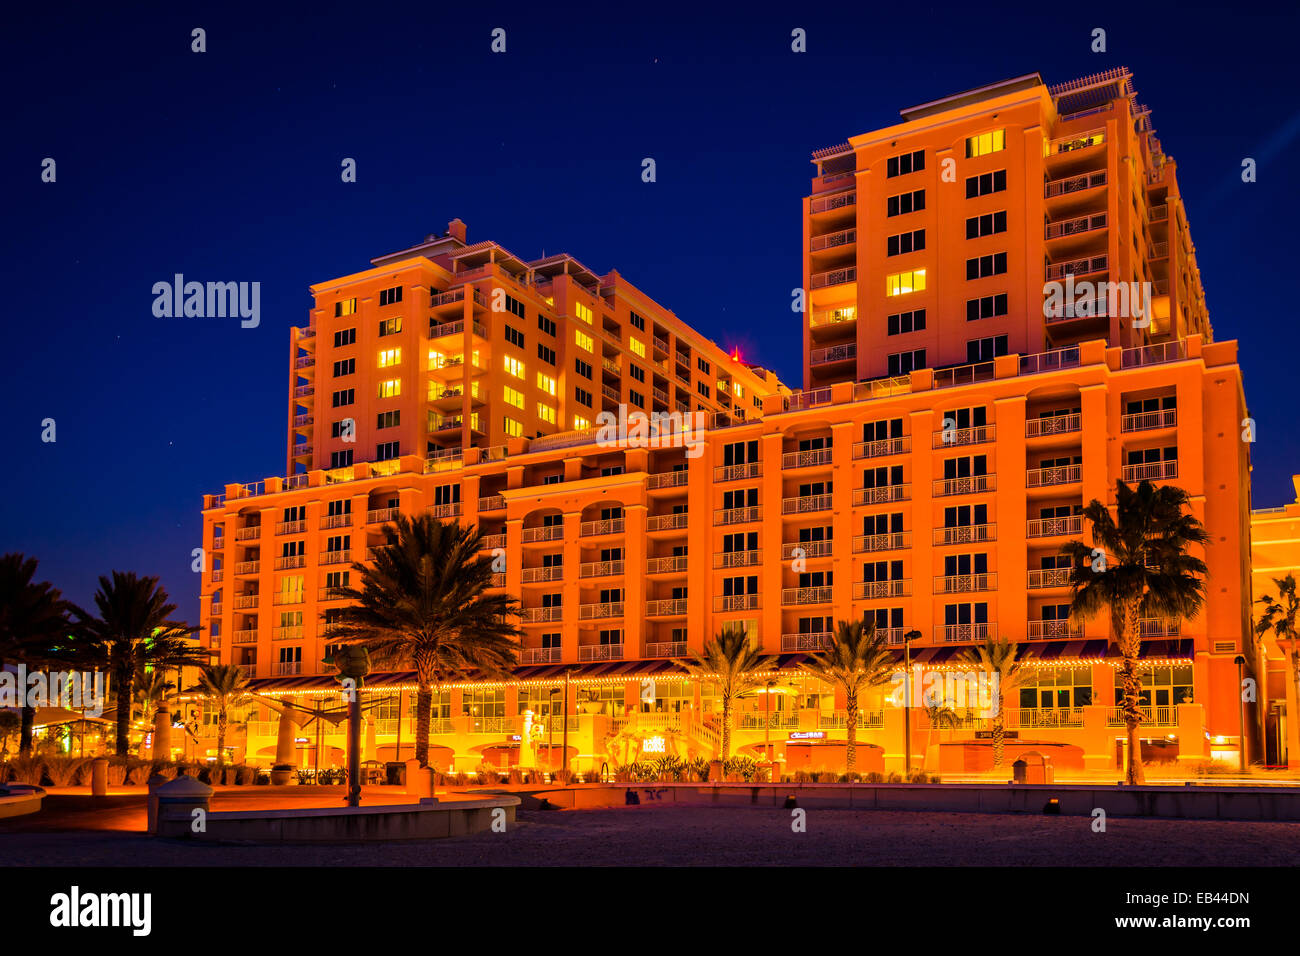 Large hotel at night in Clearwater Beach, Florida. Stock Photo